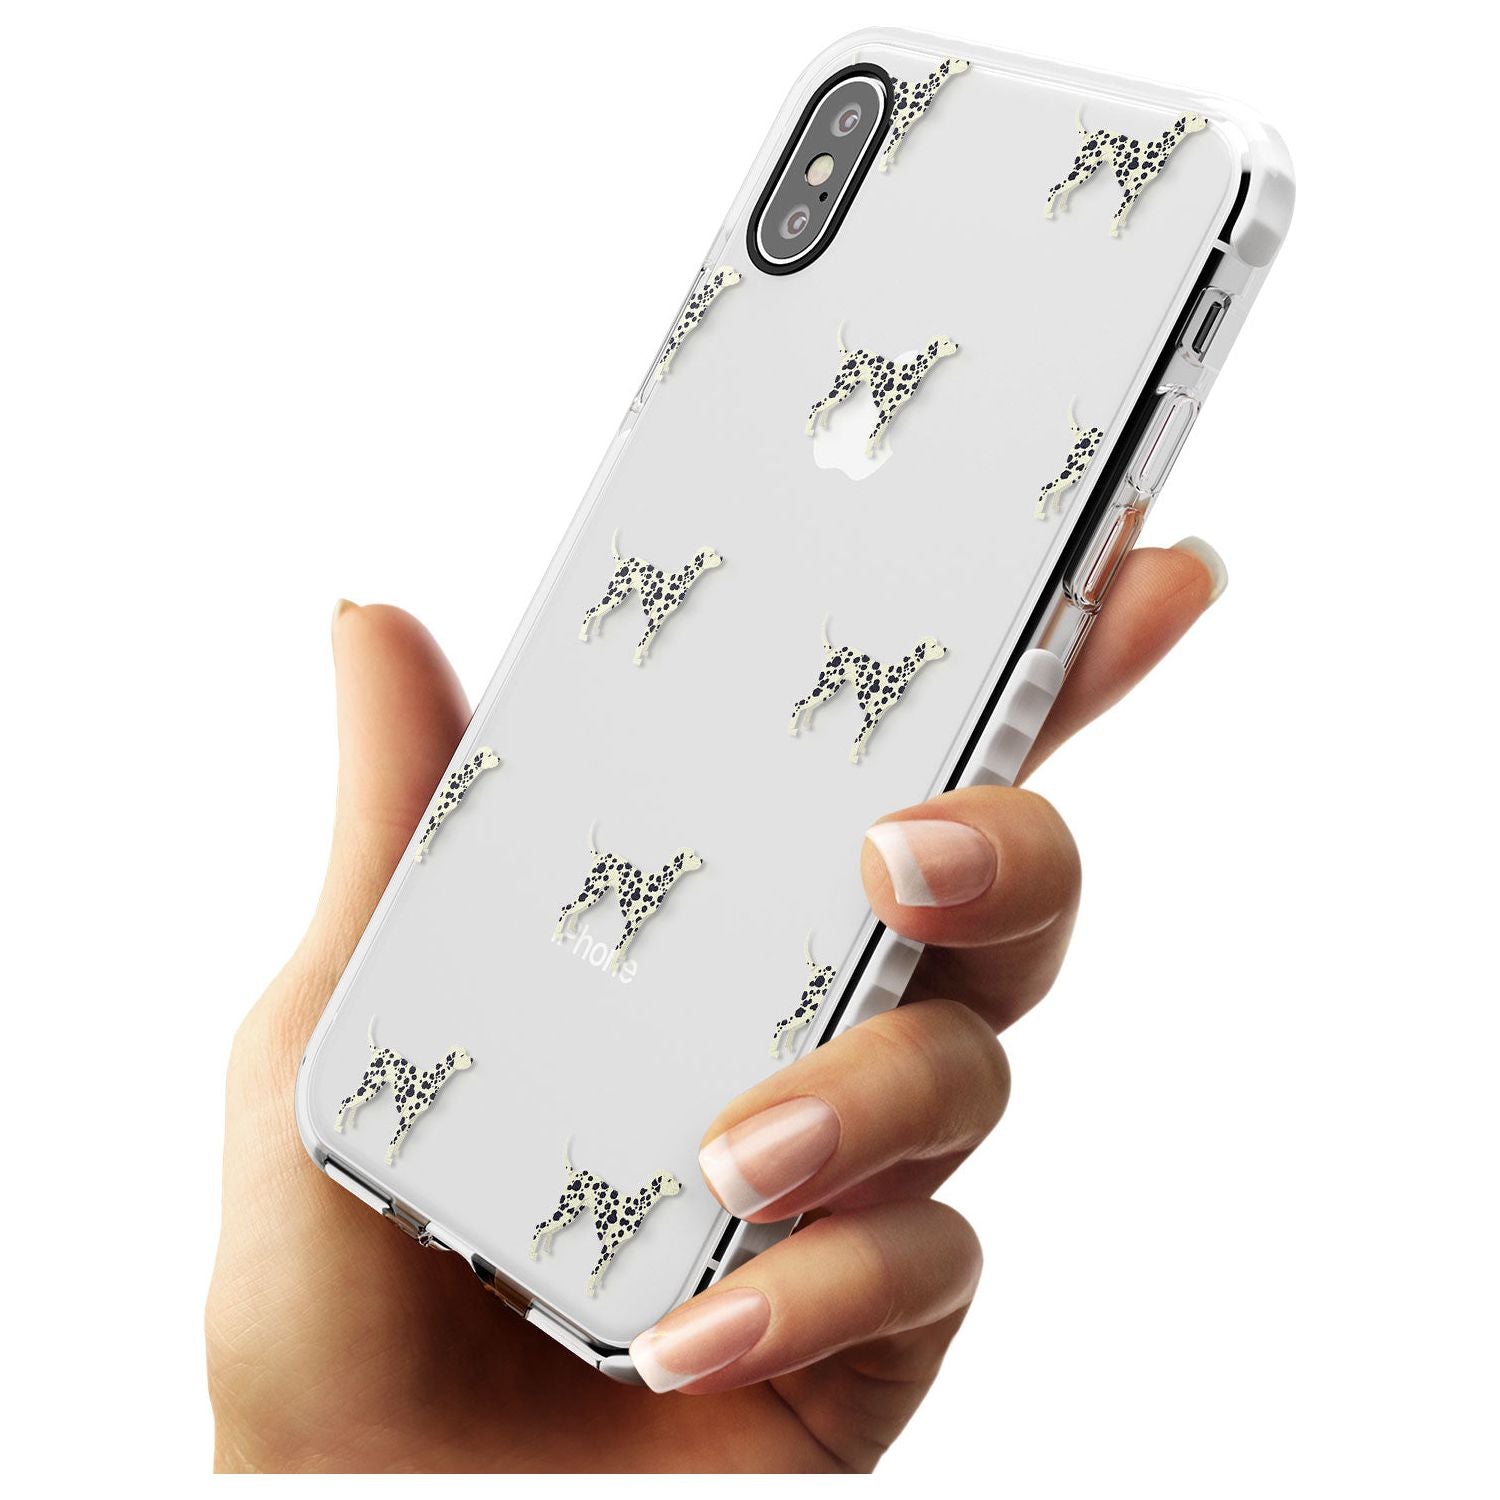 Dalmation Dog Pattern Clear Impact Phone Case for iPhone X XS Max XR